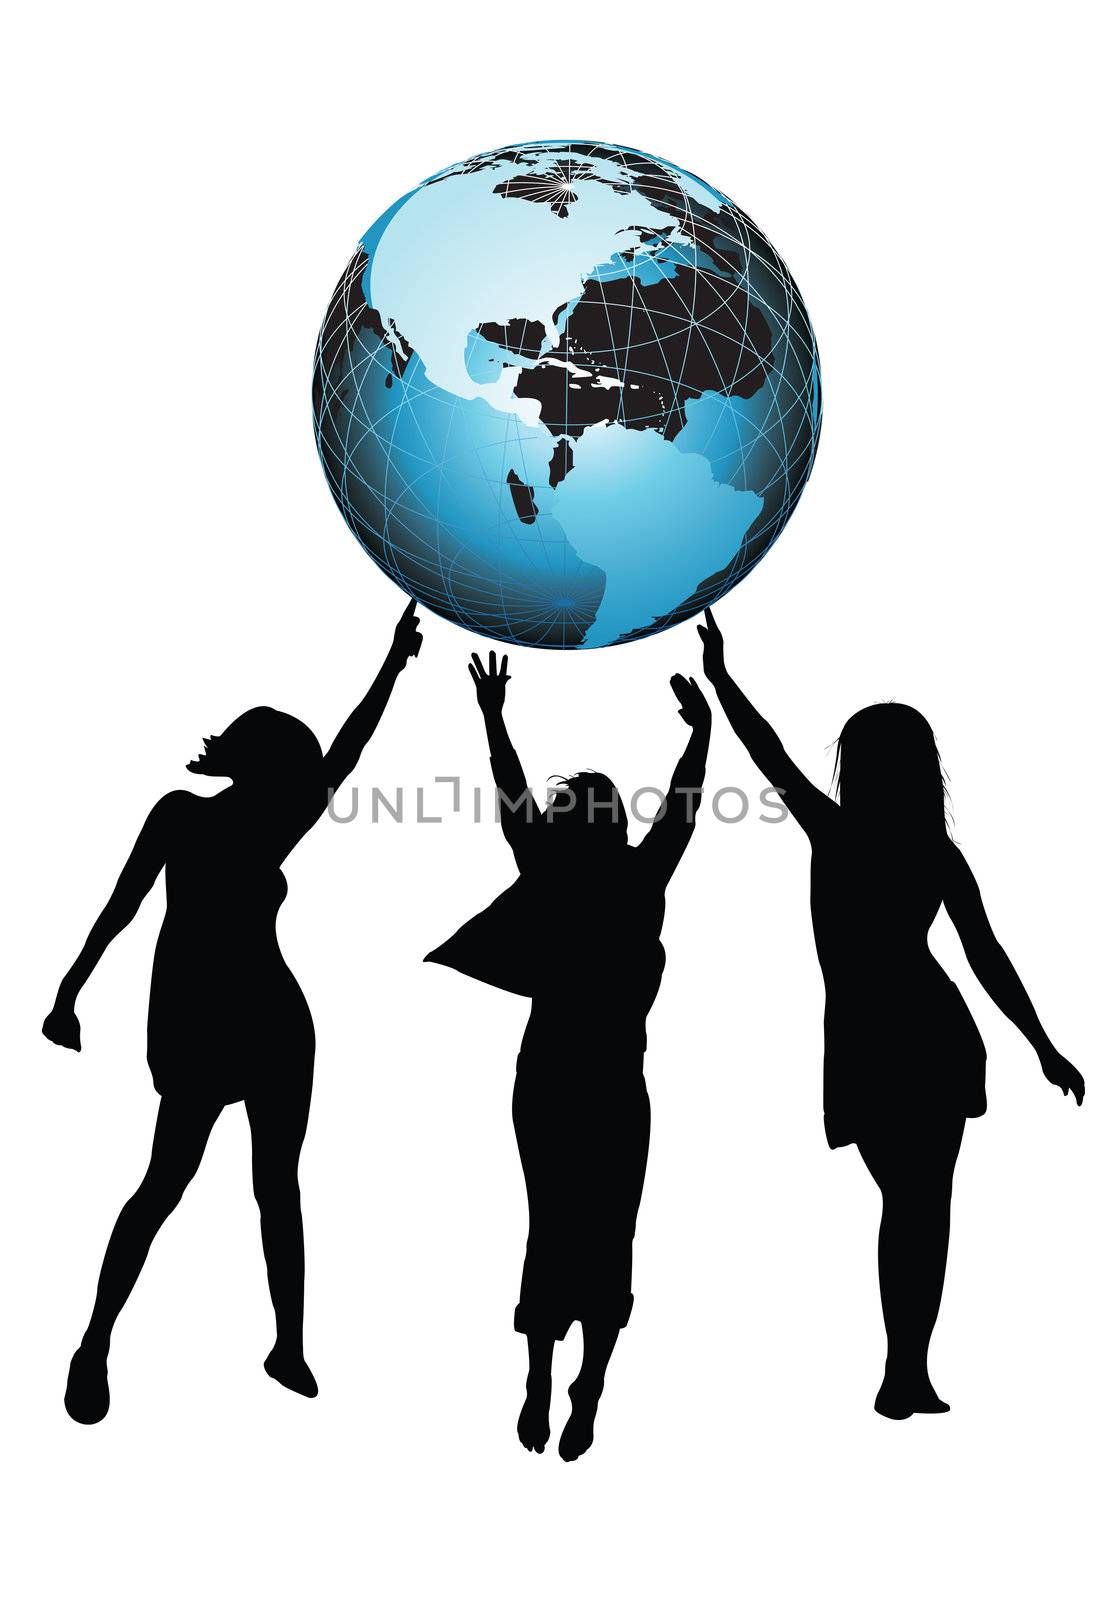 Girles and globe by git